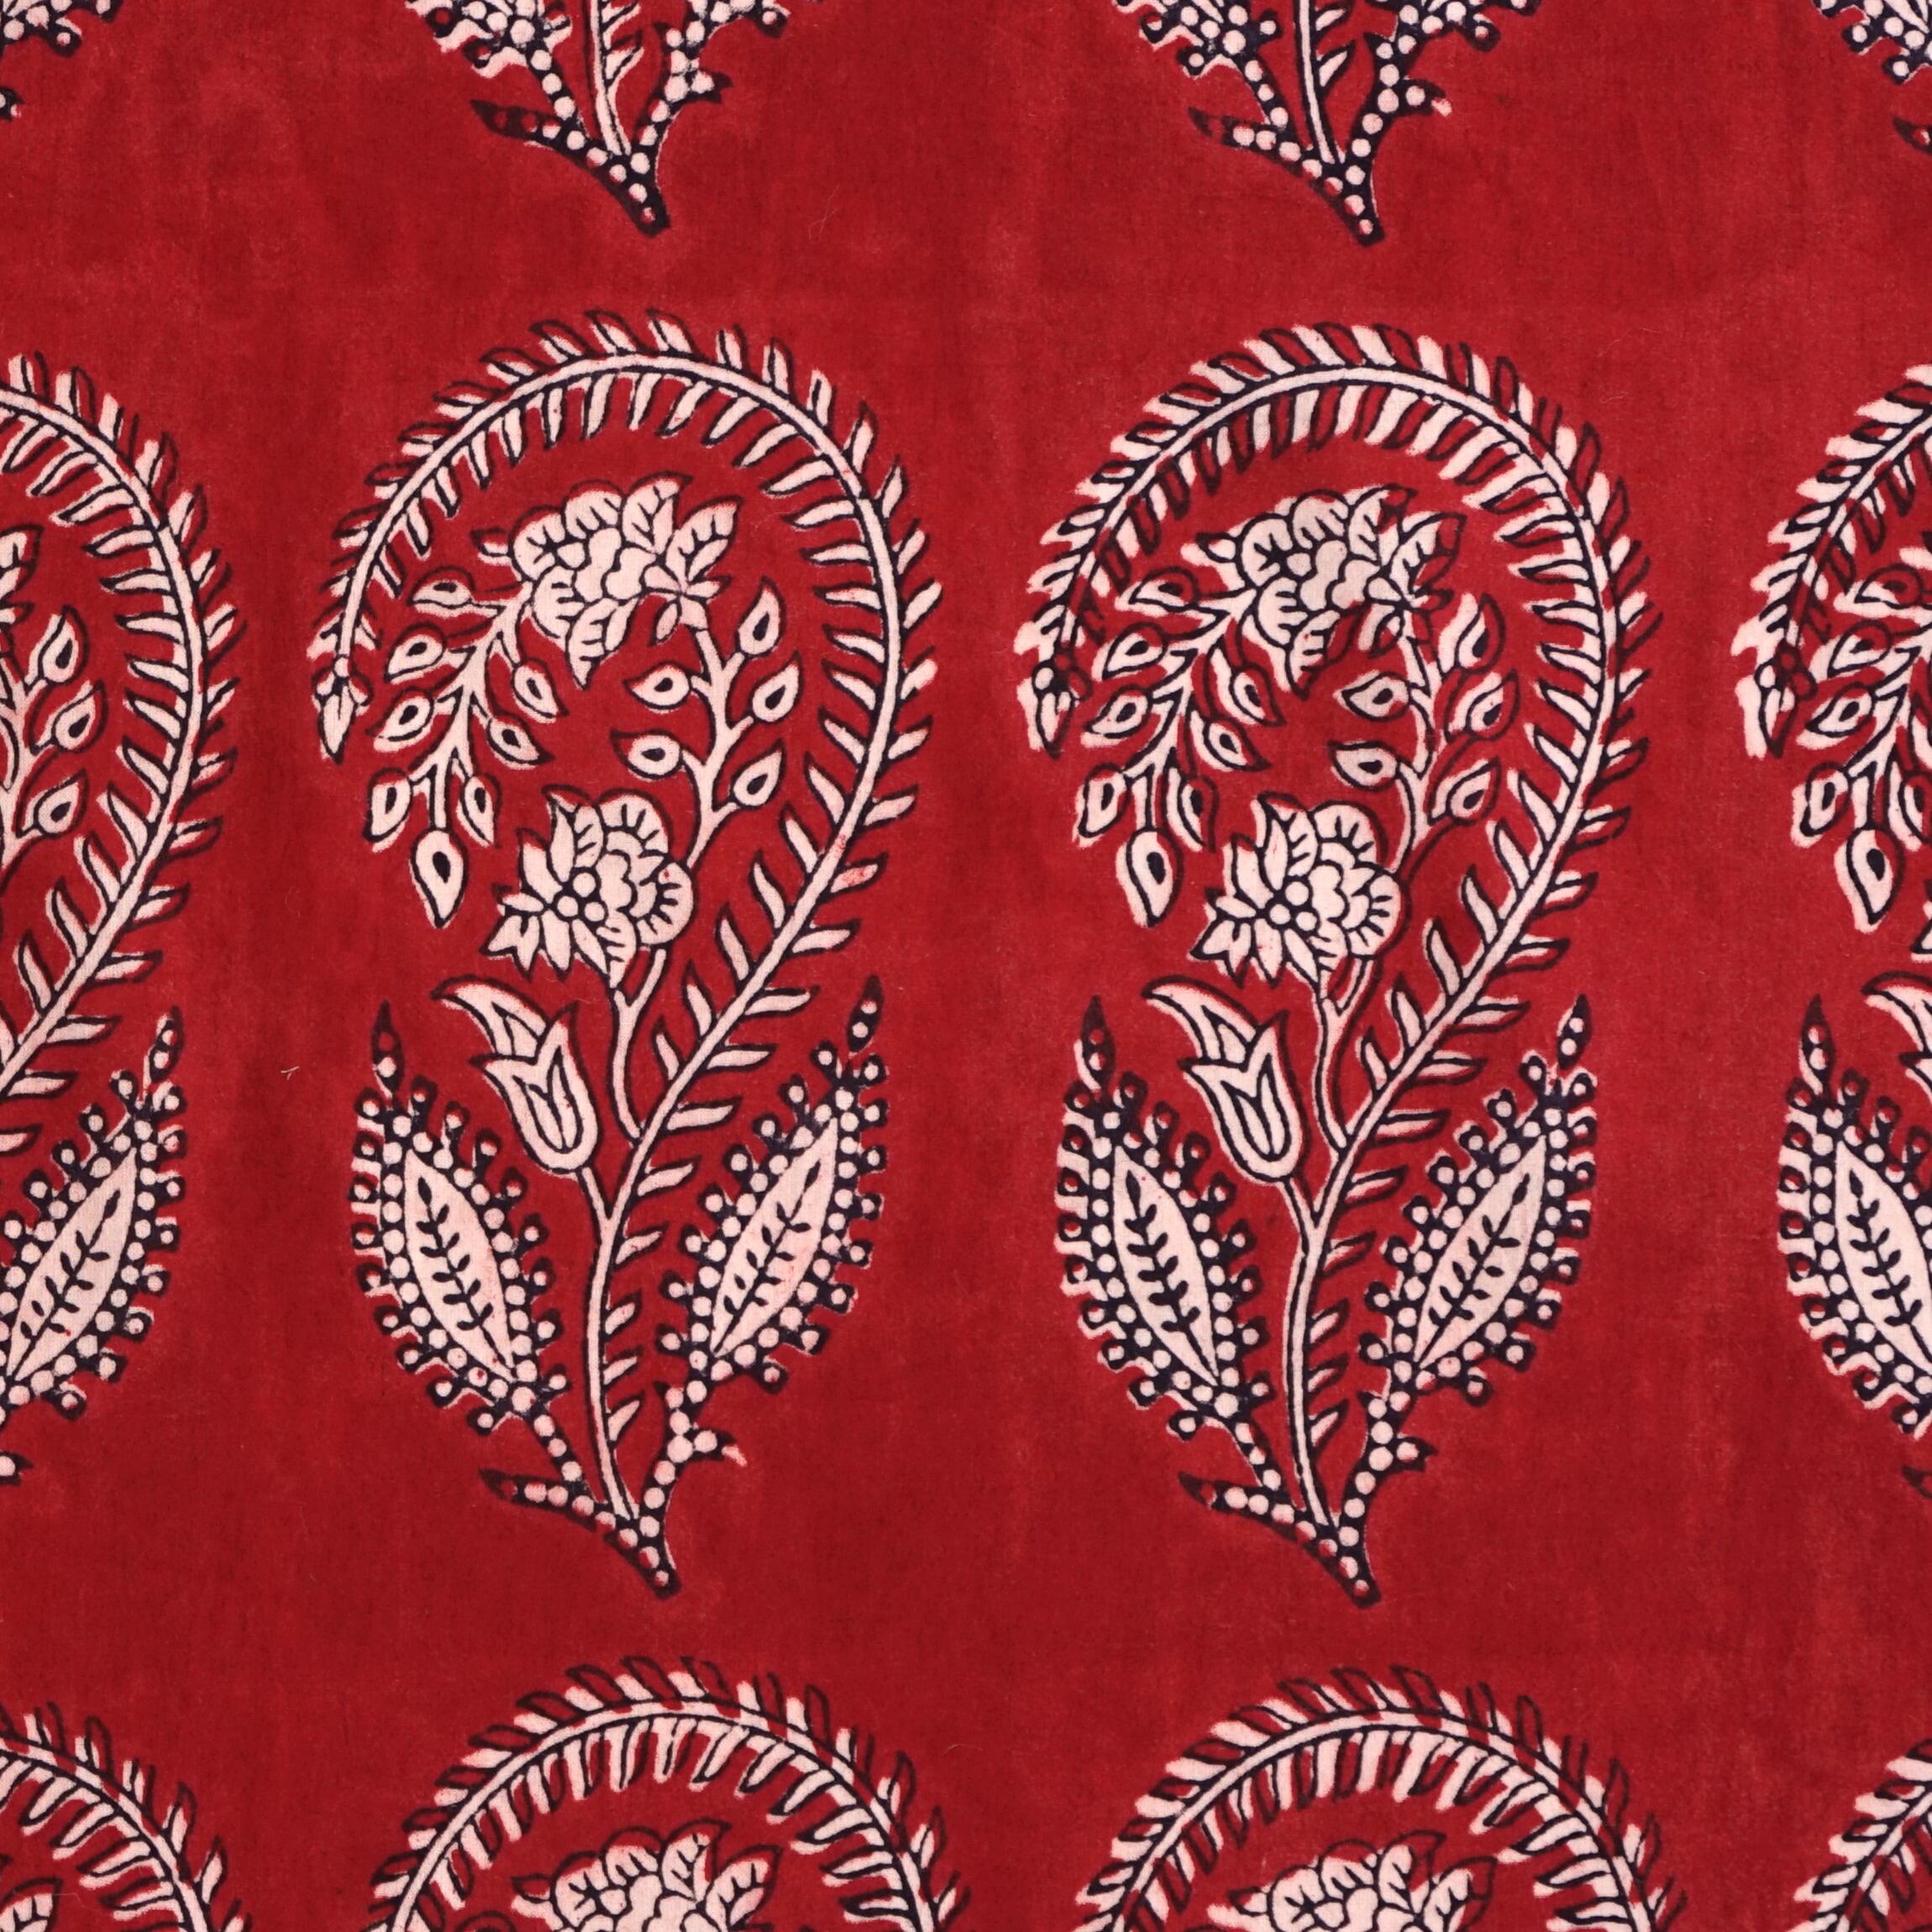 100% Block - Printed Cotton Fabric From India - Scorpion Design - Iron Rust Black & Alizarin Red Dyes - Flat